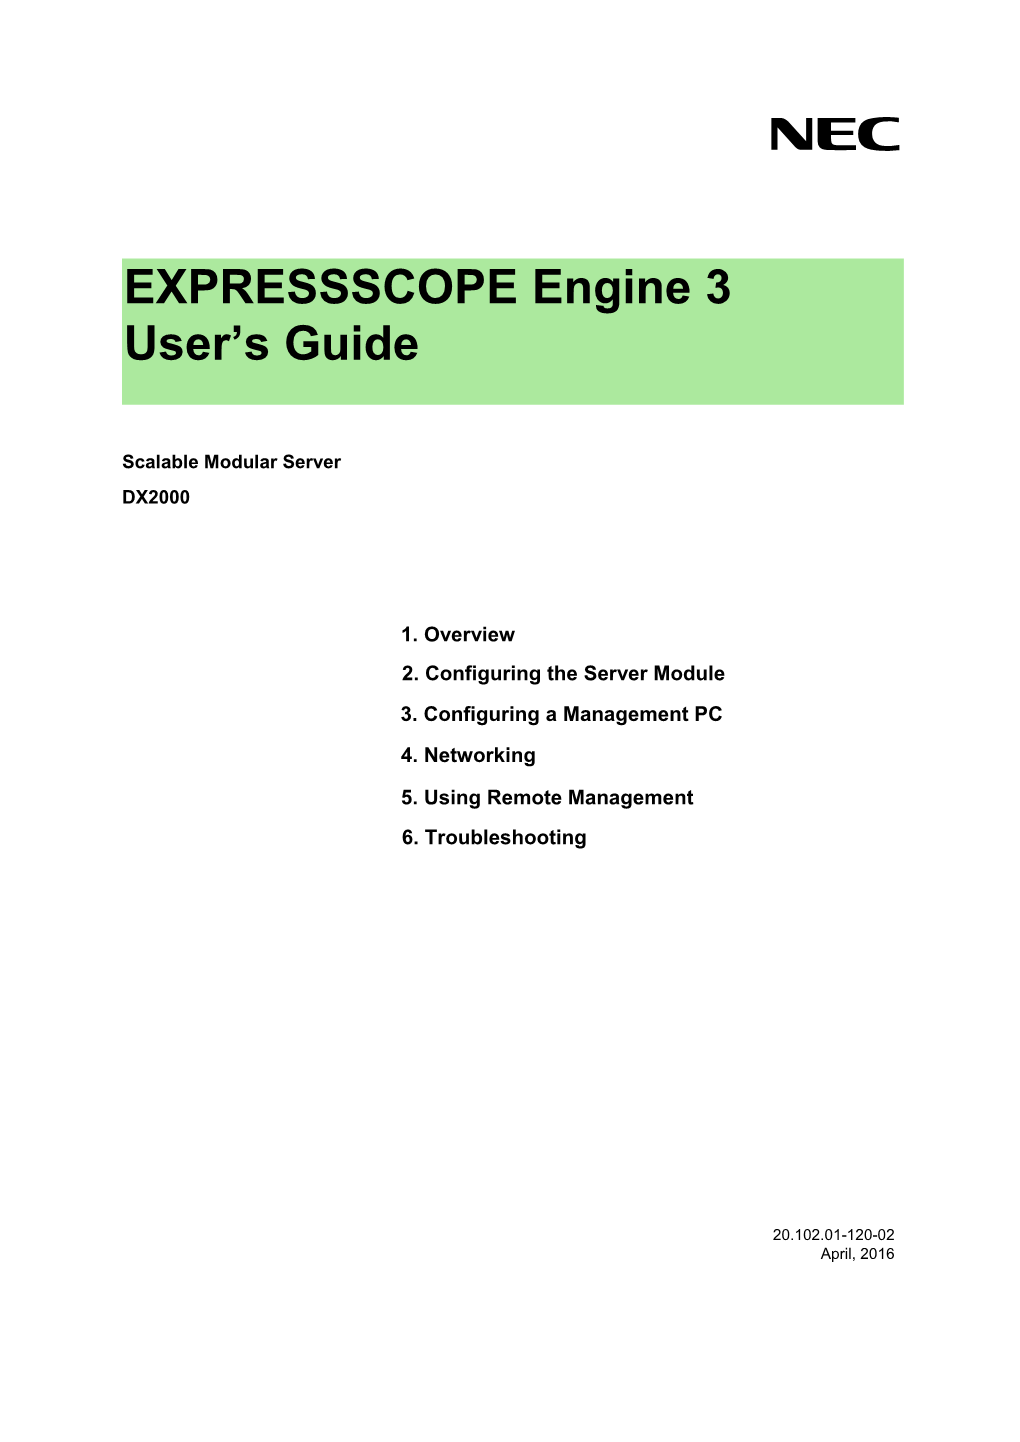 EXPRESSSCOPE Engine 3 User's Guide